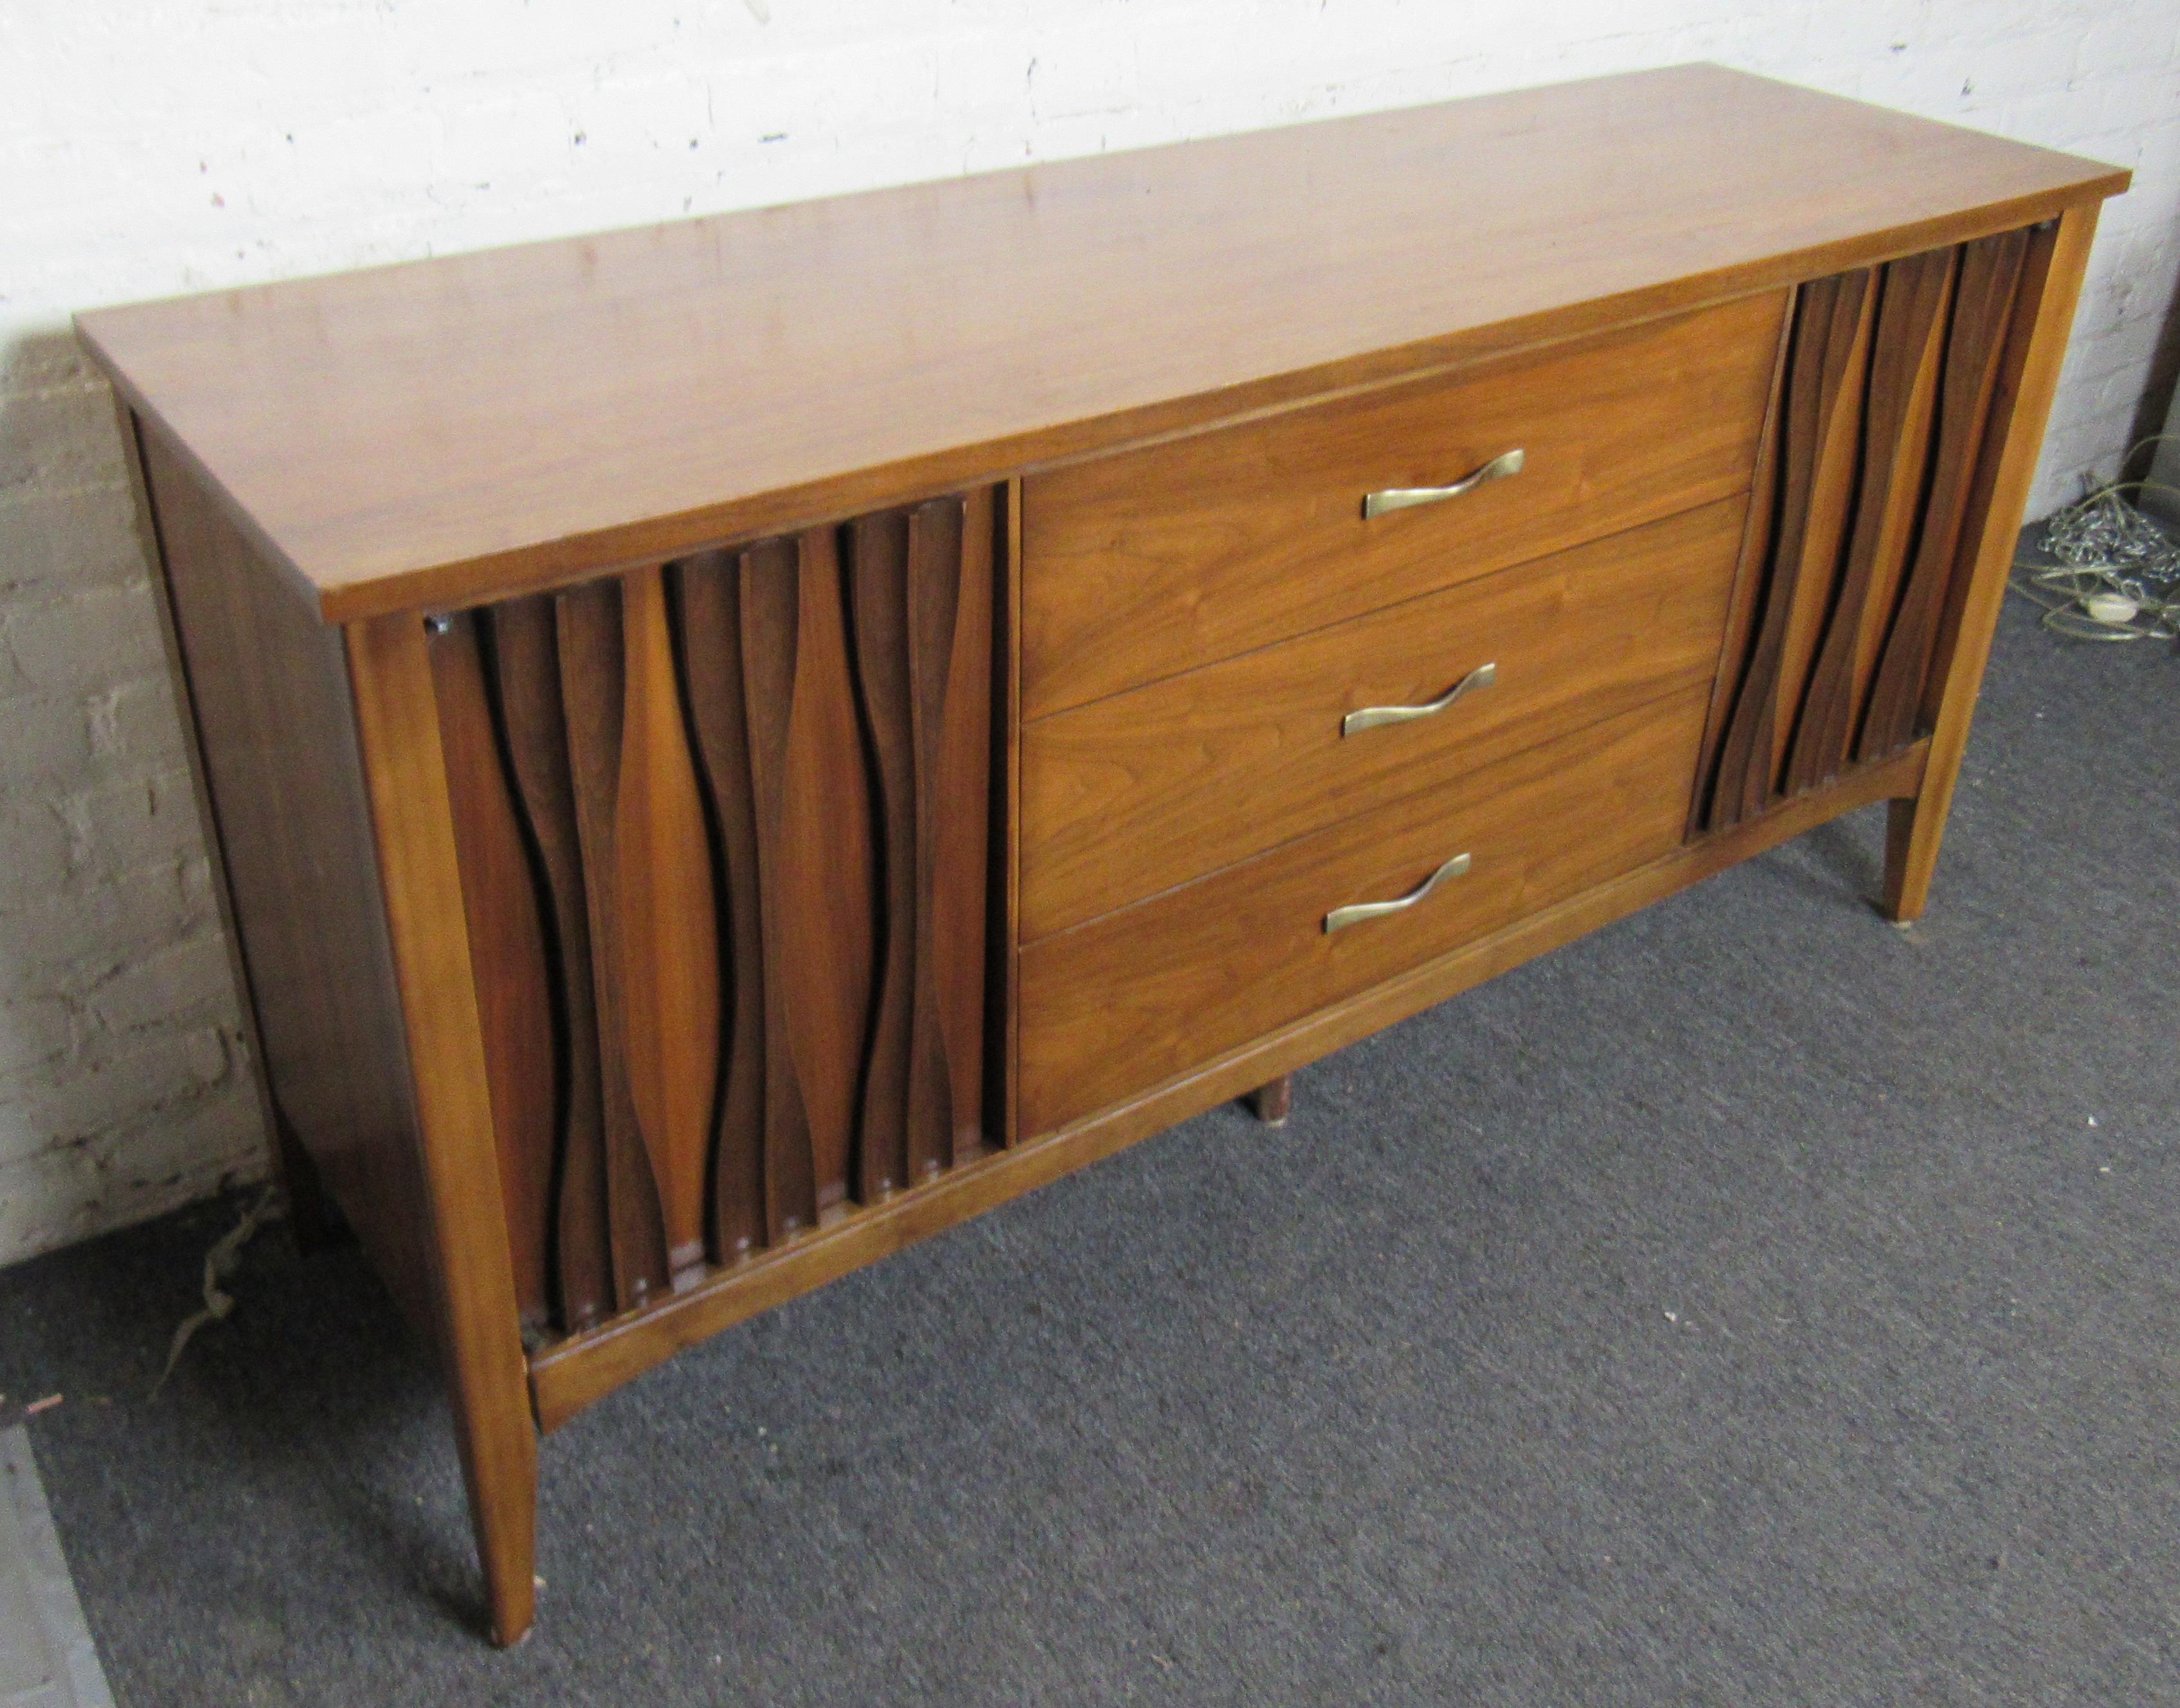 Beautiful vintage modern American made walnut wood credenza. This stunning credenza features three spacious center drawers with metal pulls, to the left and right side are two spacious cabinets with one shelf each. The cabinet doors have beautiful